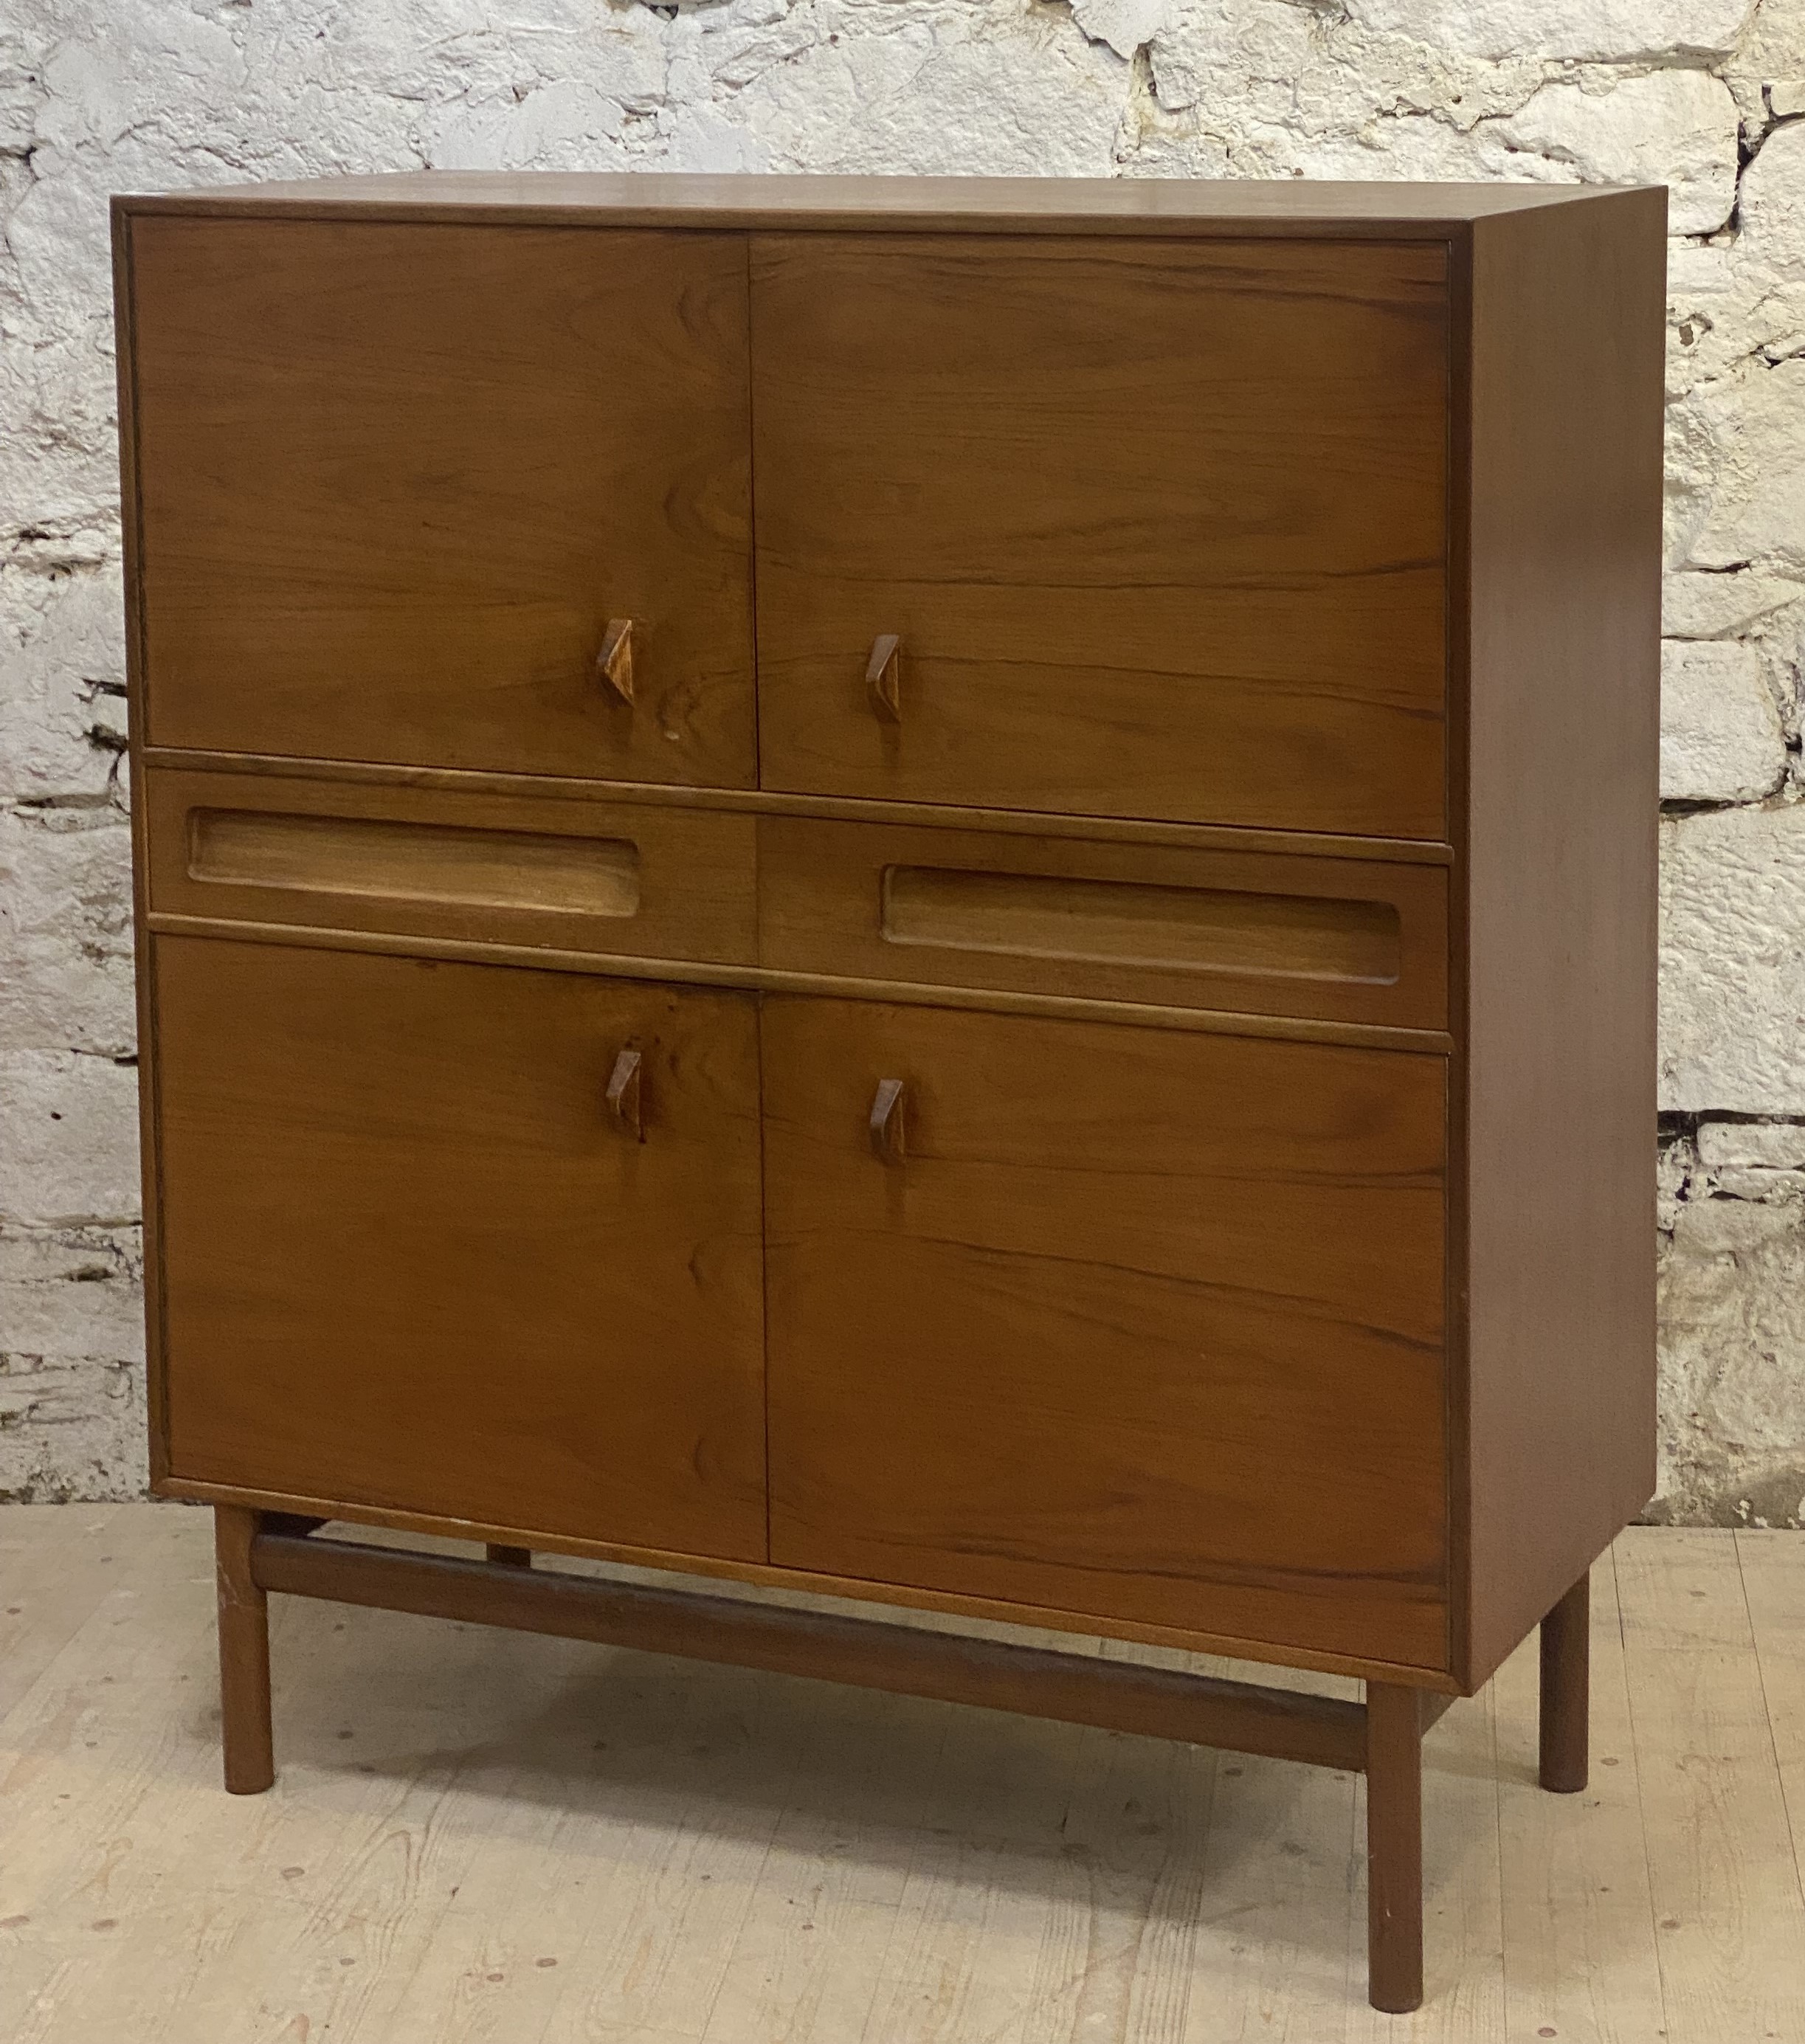 McIntosh of Kirkcaldy, A mid century teak high board, circa 1960's, fitted with four cupboards,